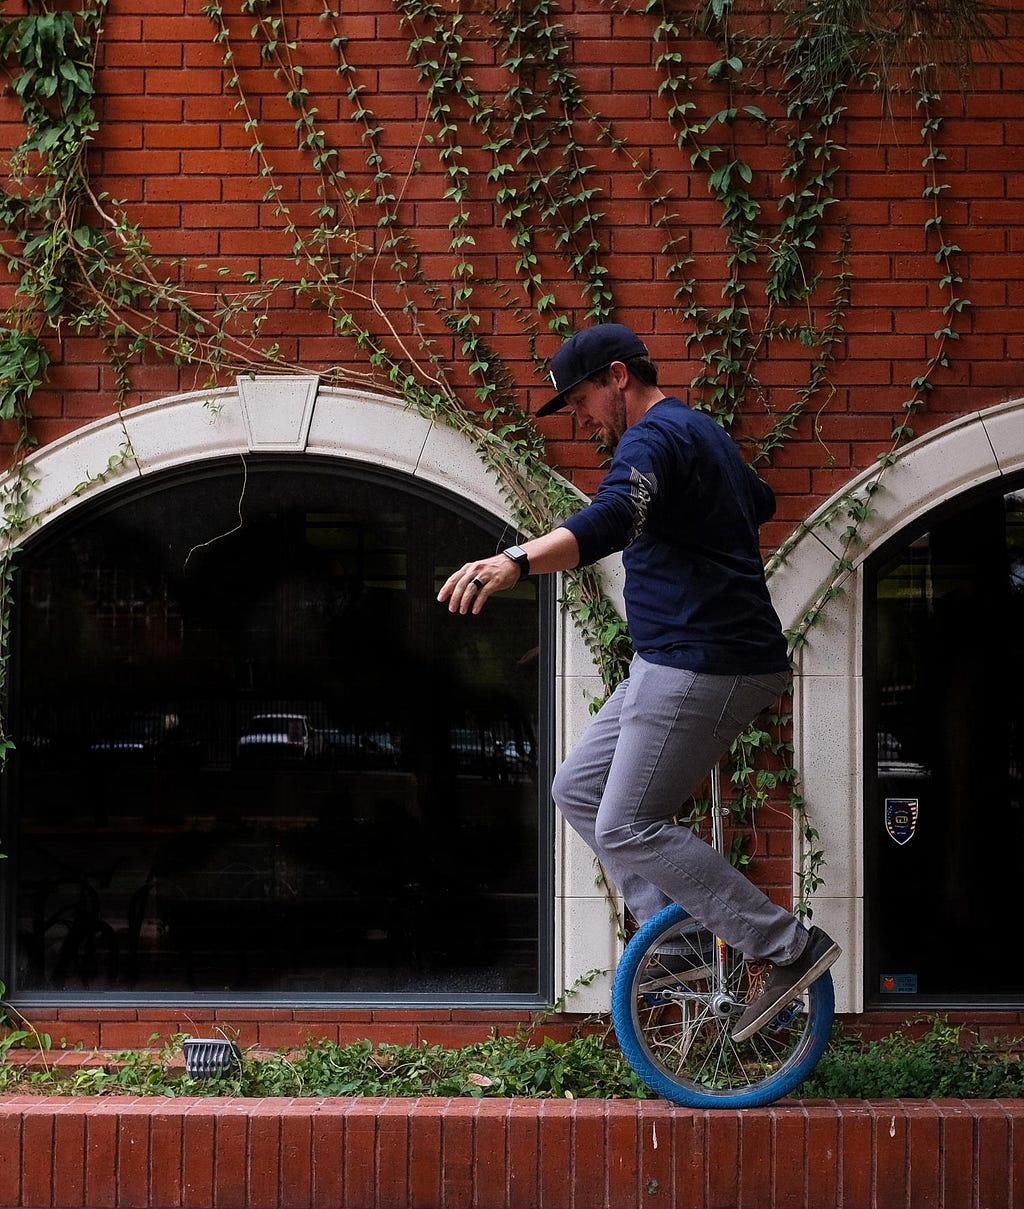 A man rides a blue unicycle atop a low brick wall